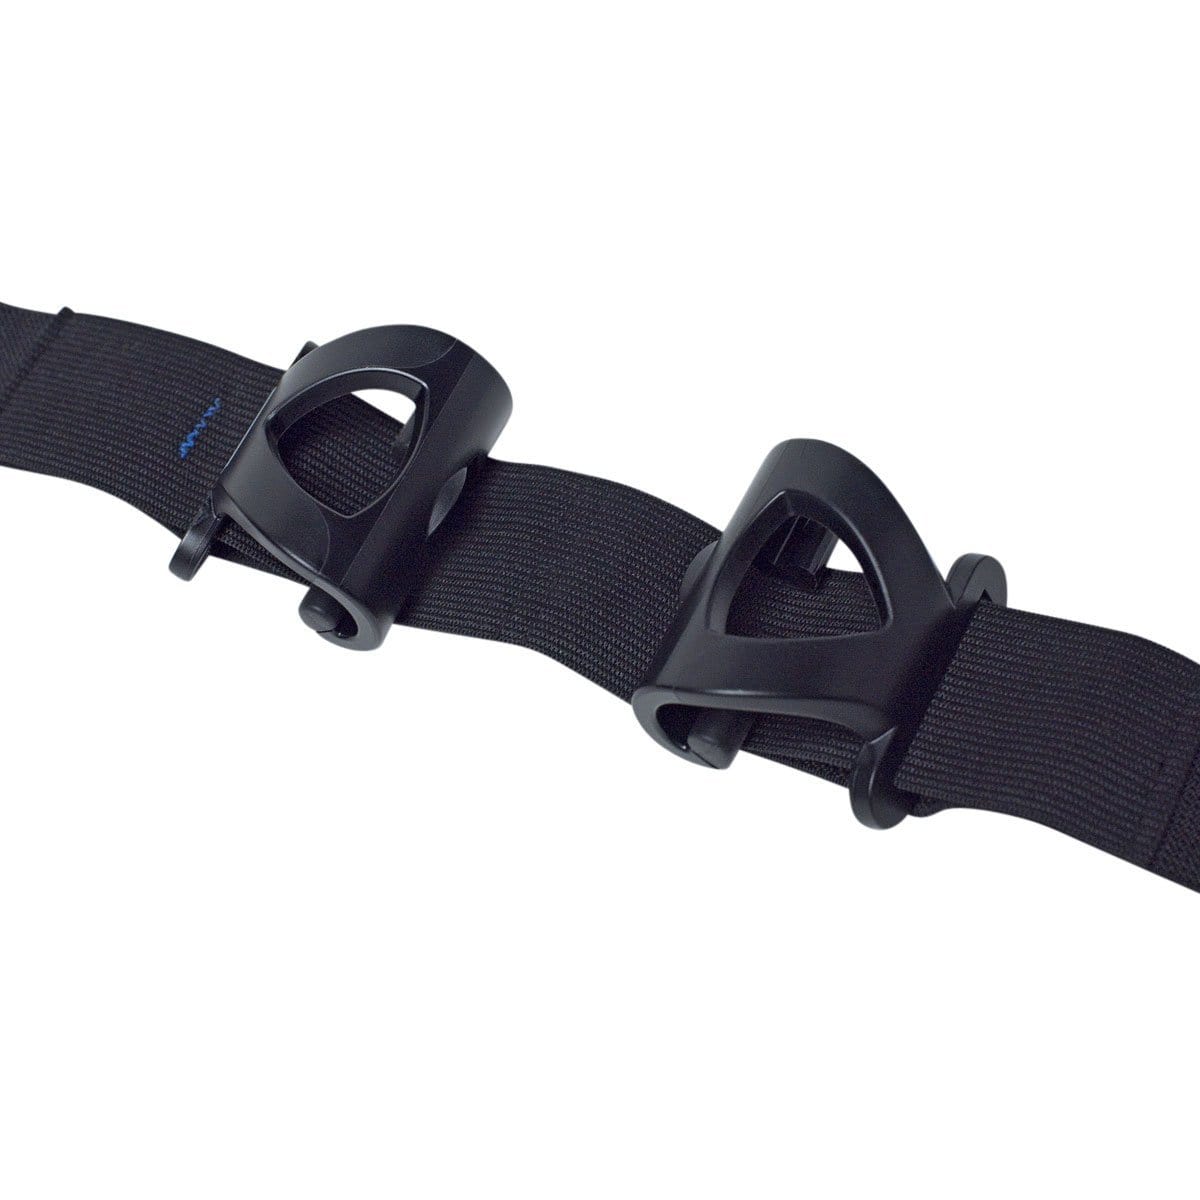 MyClip Multi (MCF) Leg Strap for iPad and Tablets